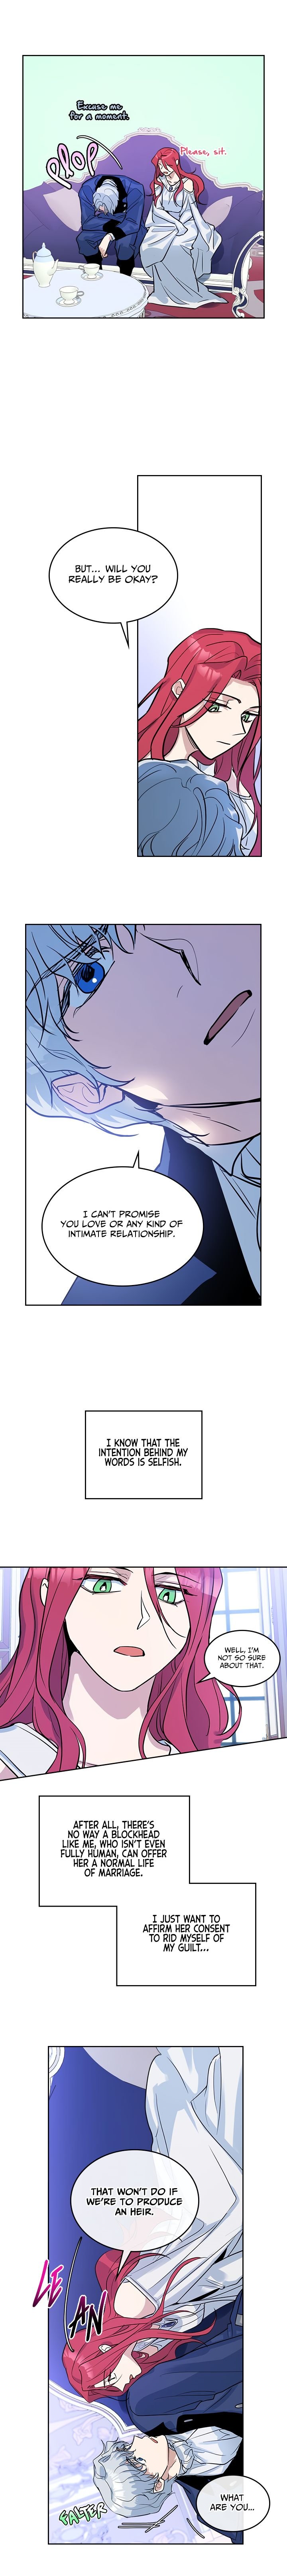 the-lady-and-the-beast-chap-32-4